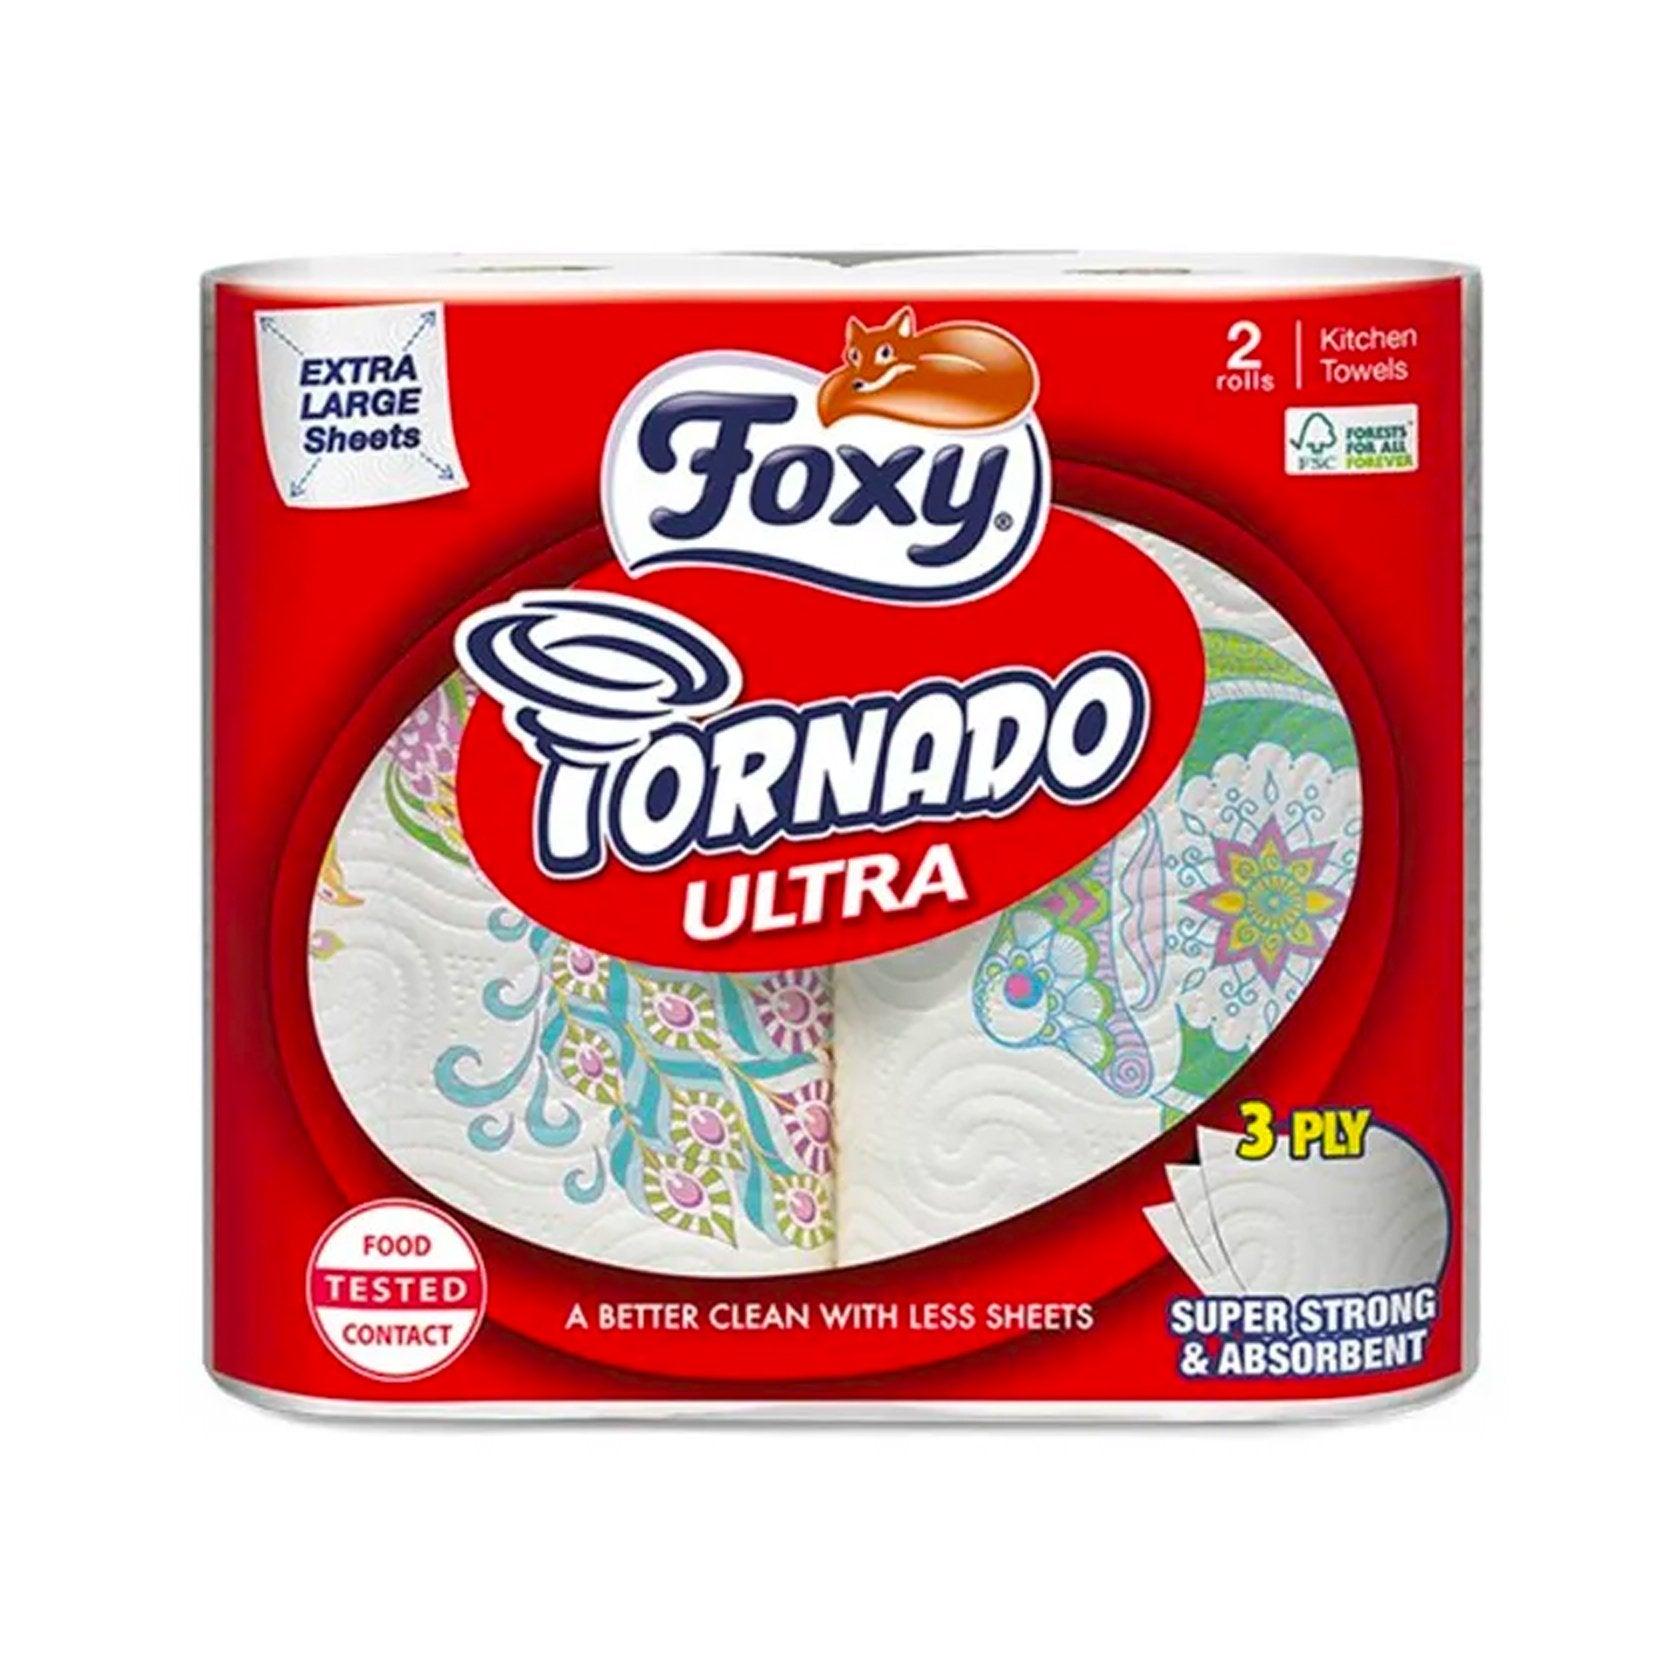 Foxy Tornado Ultra - 3 Ply Kitchen Towel - Pack of 2 - Vending Superstore